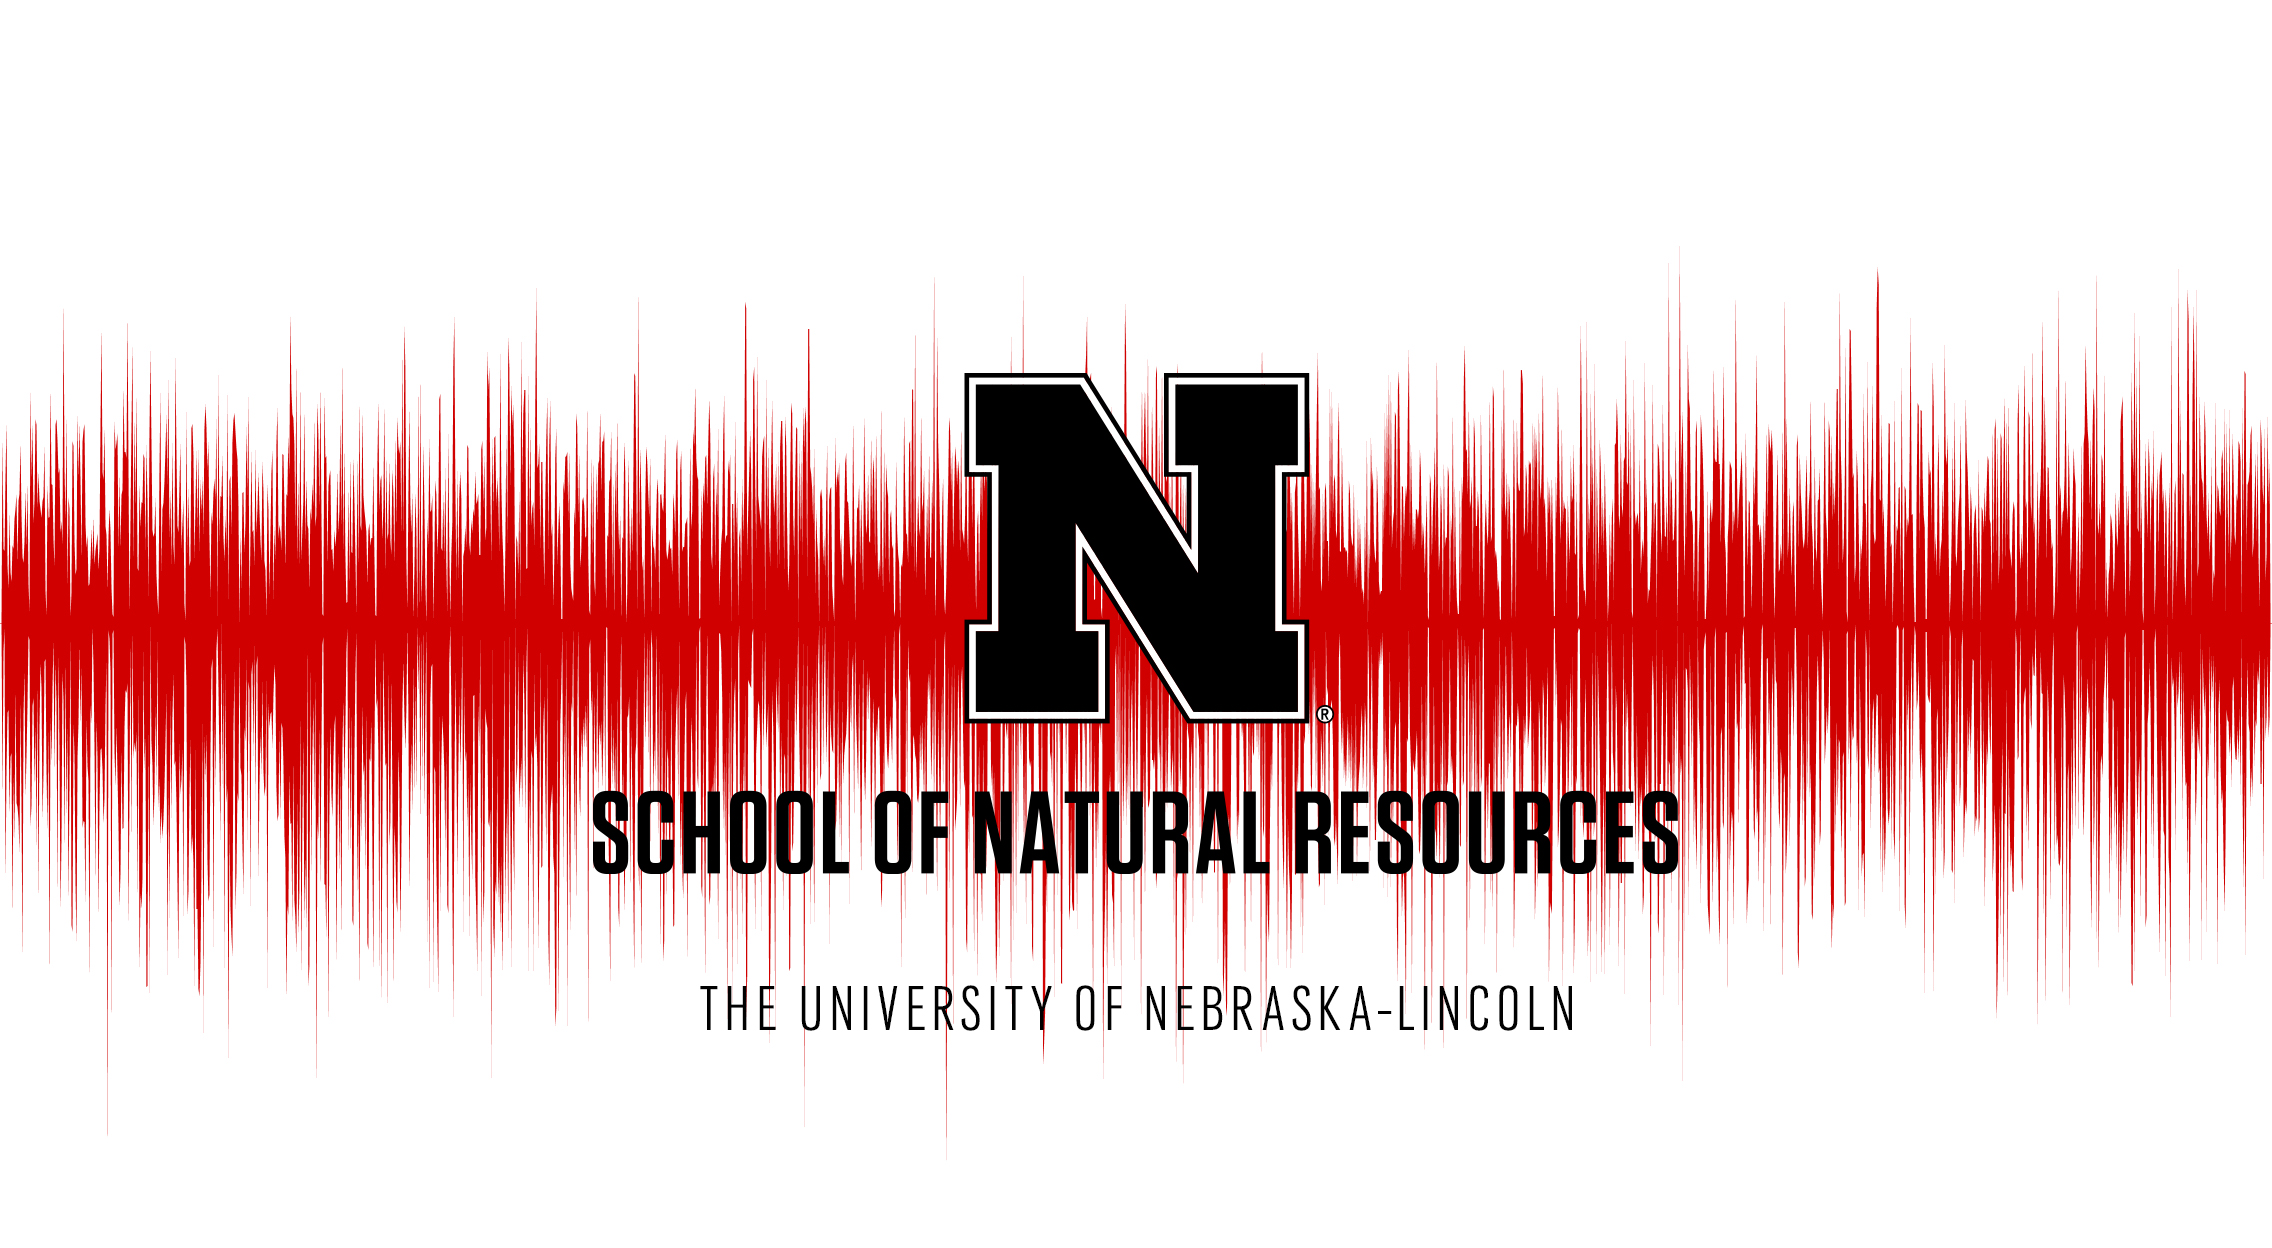 IANR Vice President and Vice Chancellor Mike Boehm joins us to discuss UNL